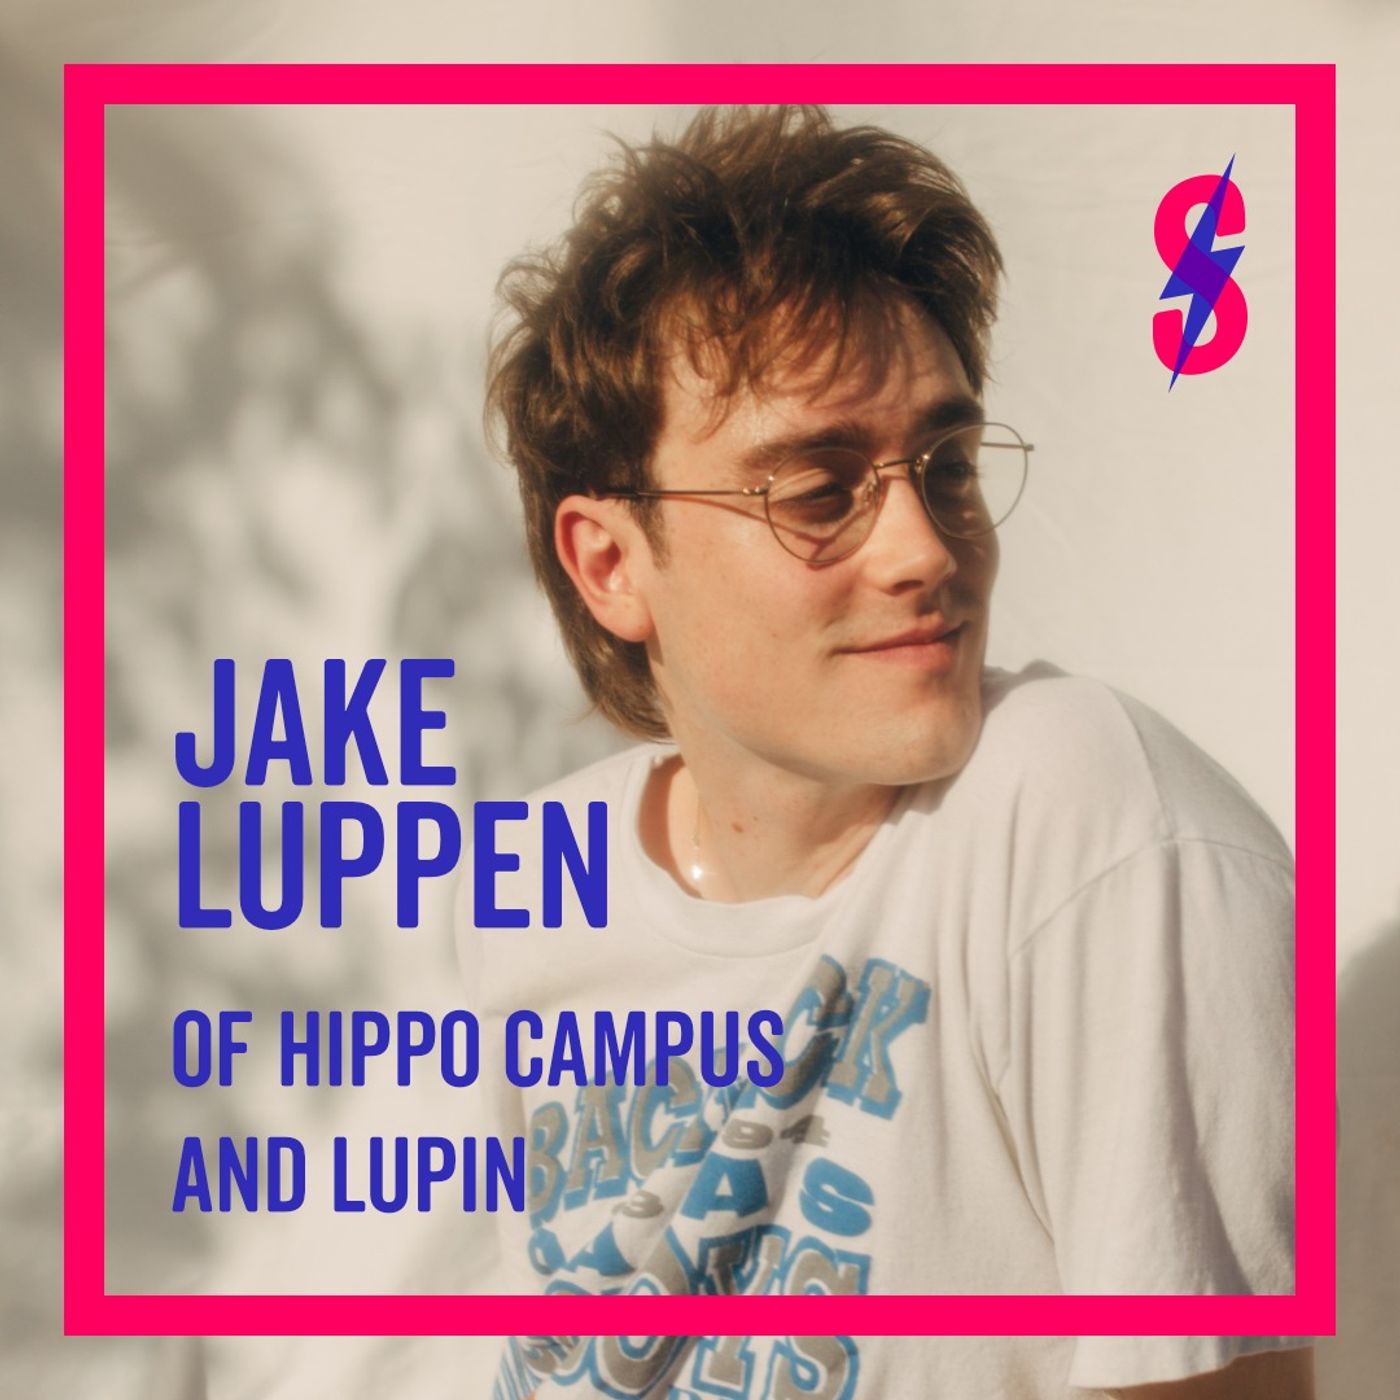 When The Cracks Begin To Show: Jake Luppen (Hippo Campus/Lupin) on The White Album